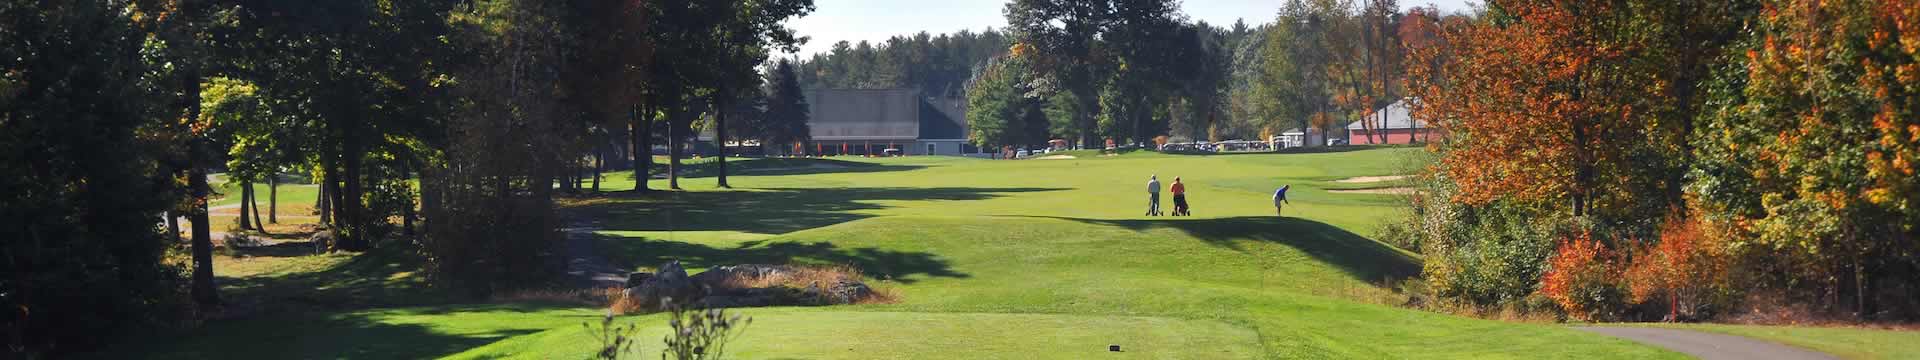 breakfast hill golf course new hampshire 18a